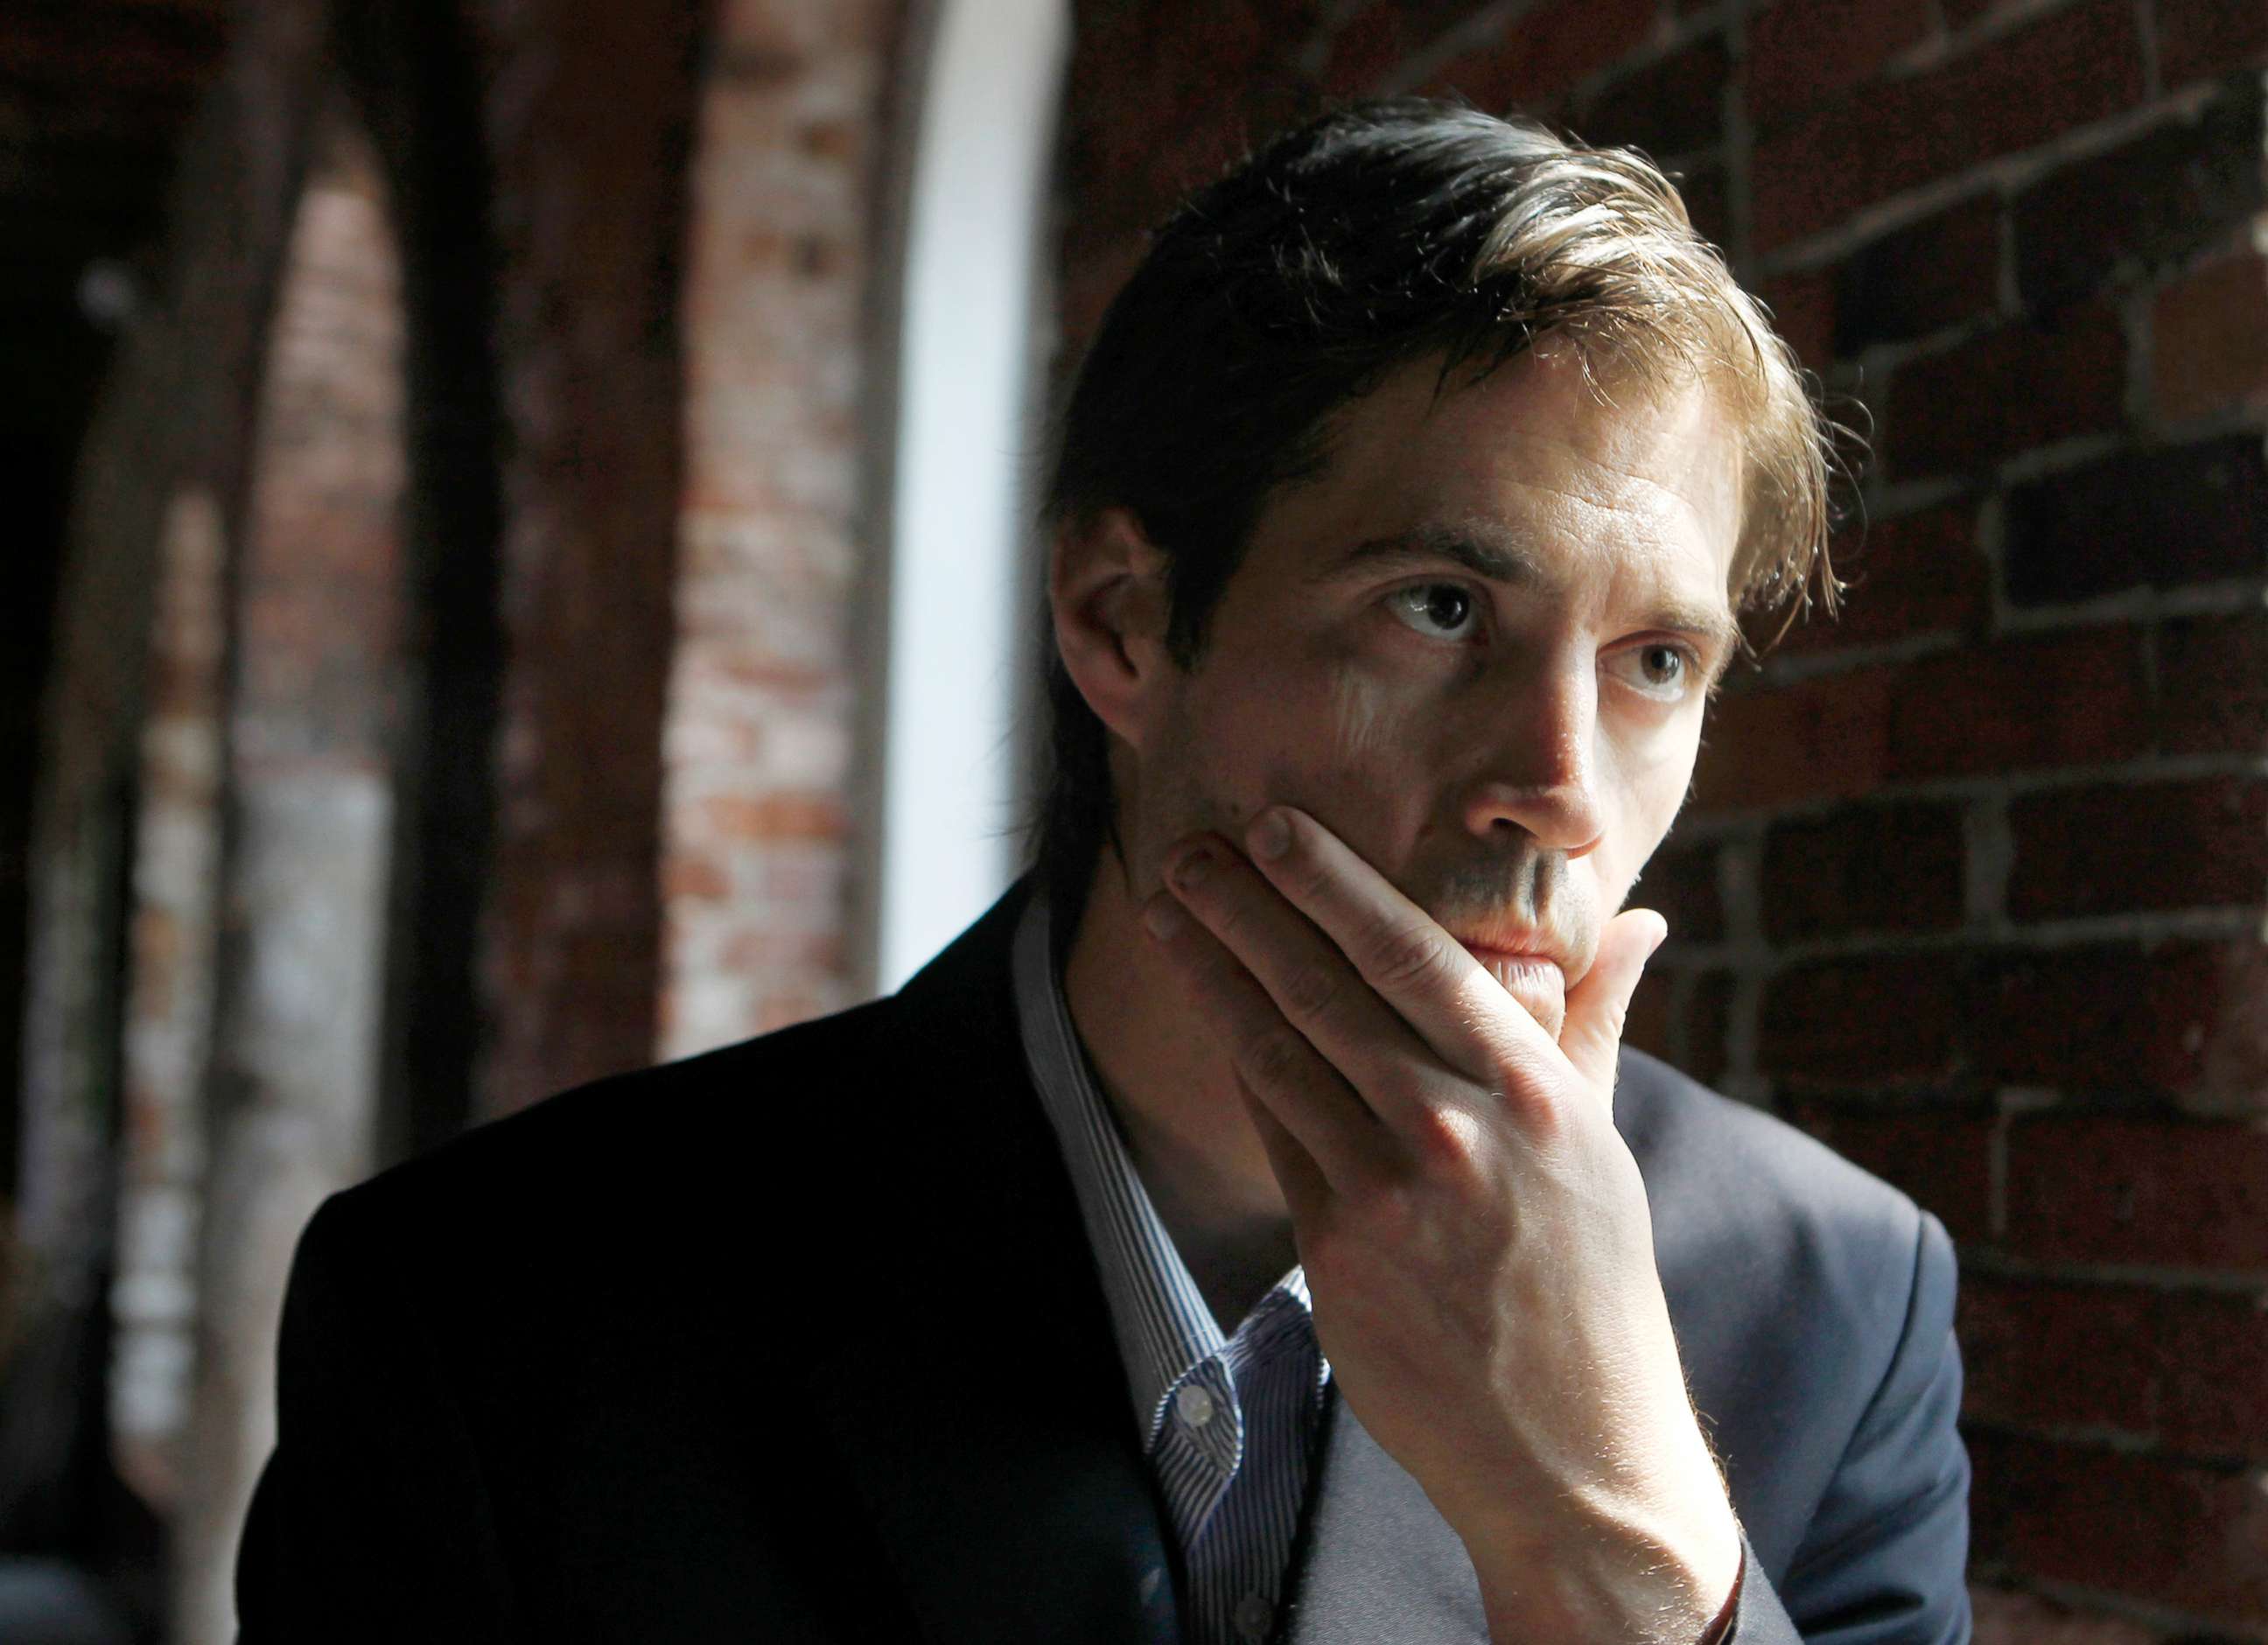 PHOTO: Journalist James Foley responds to questions during an interview with The Associated Press in Boston, May 2011.